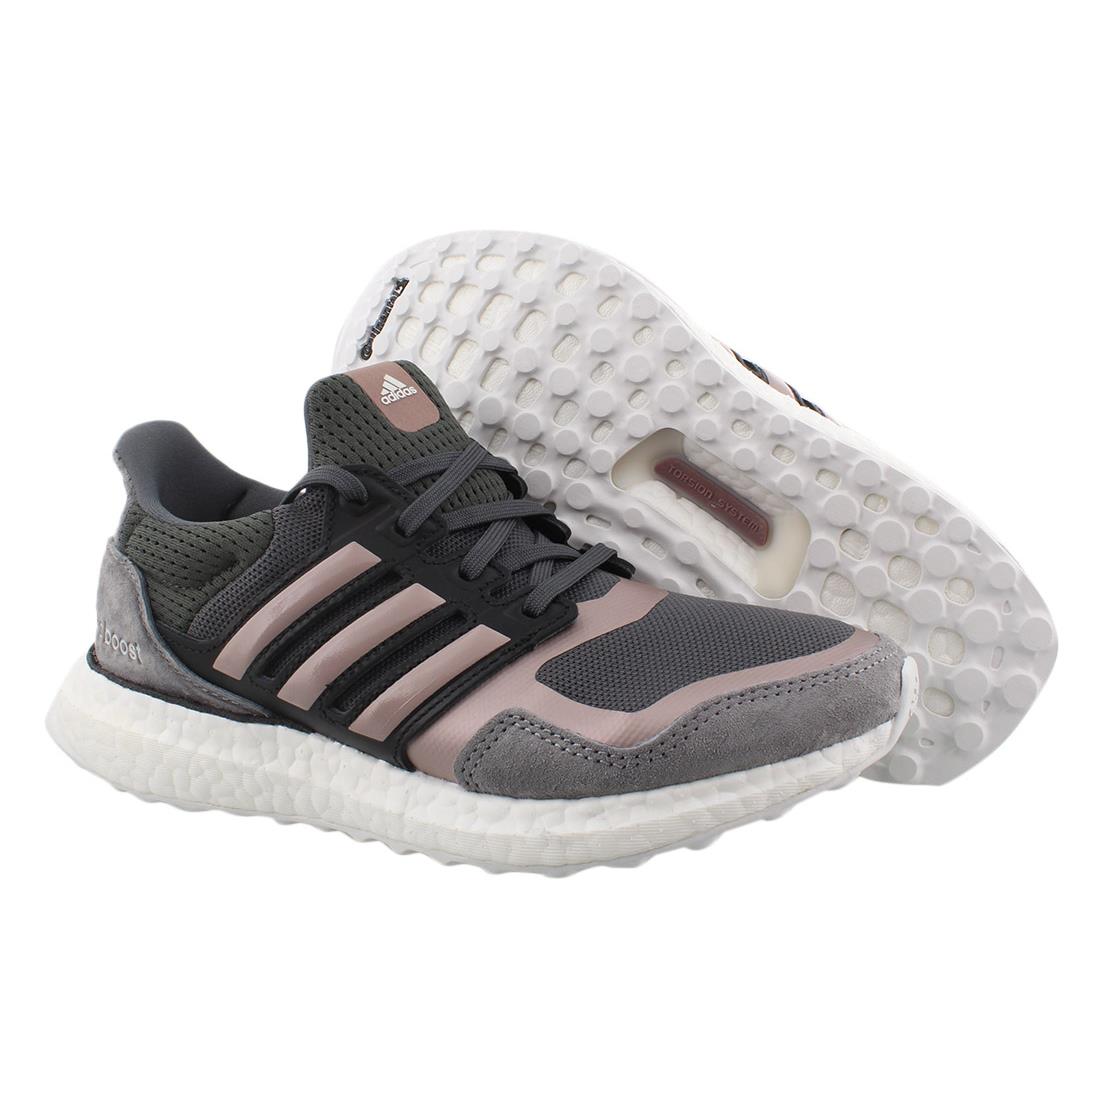 Adidas Ultraboost Dna S L Womens Shoes Grey/Pink